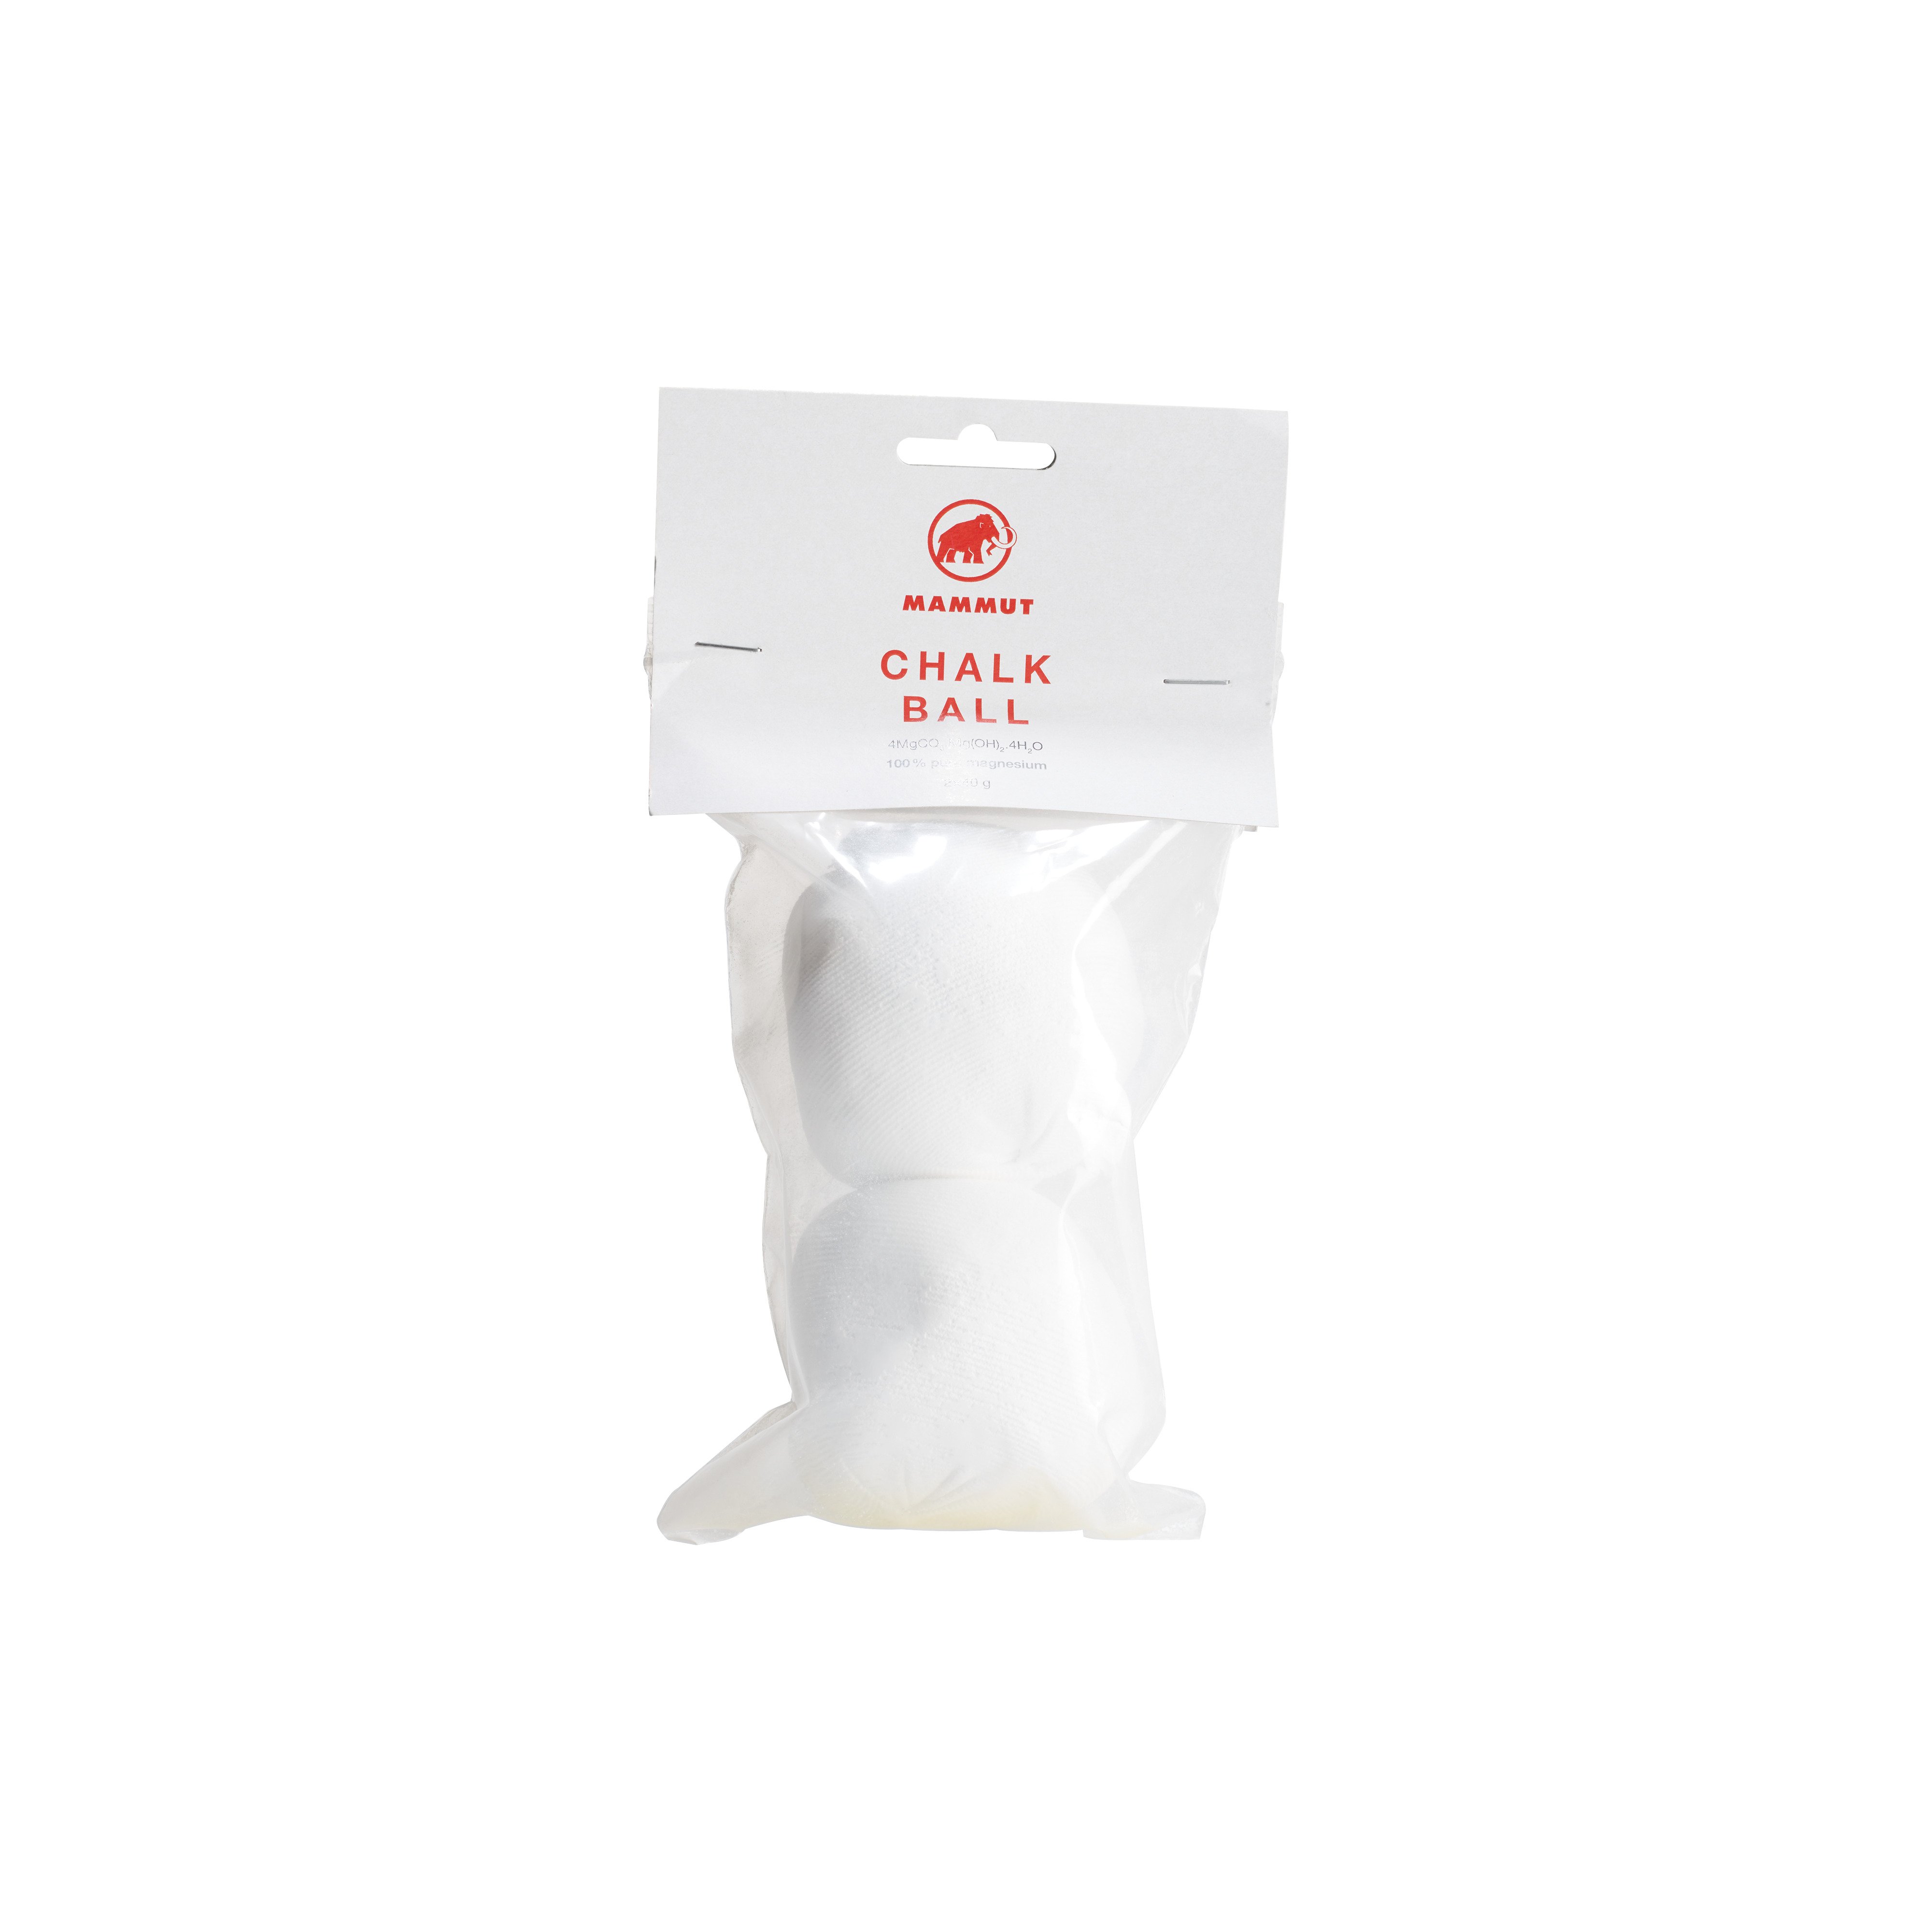 Chalk Ball 2 x 40 g - neutral, one size product image